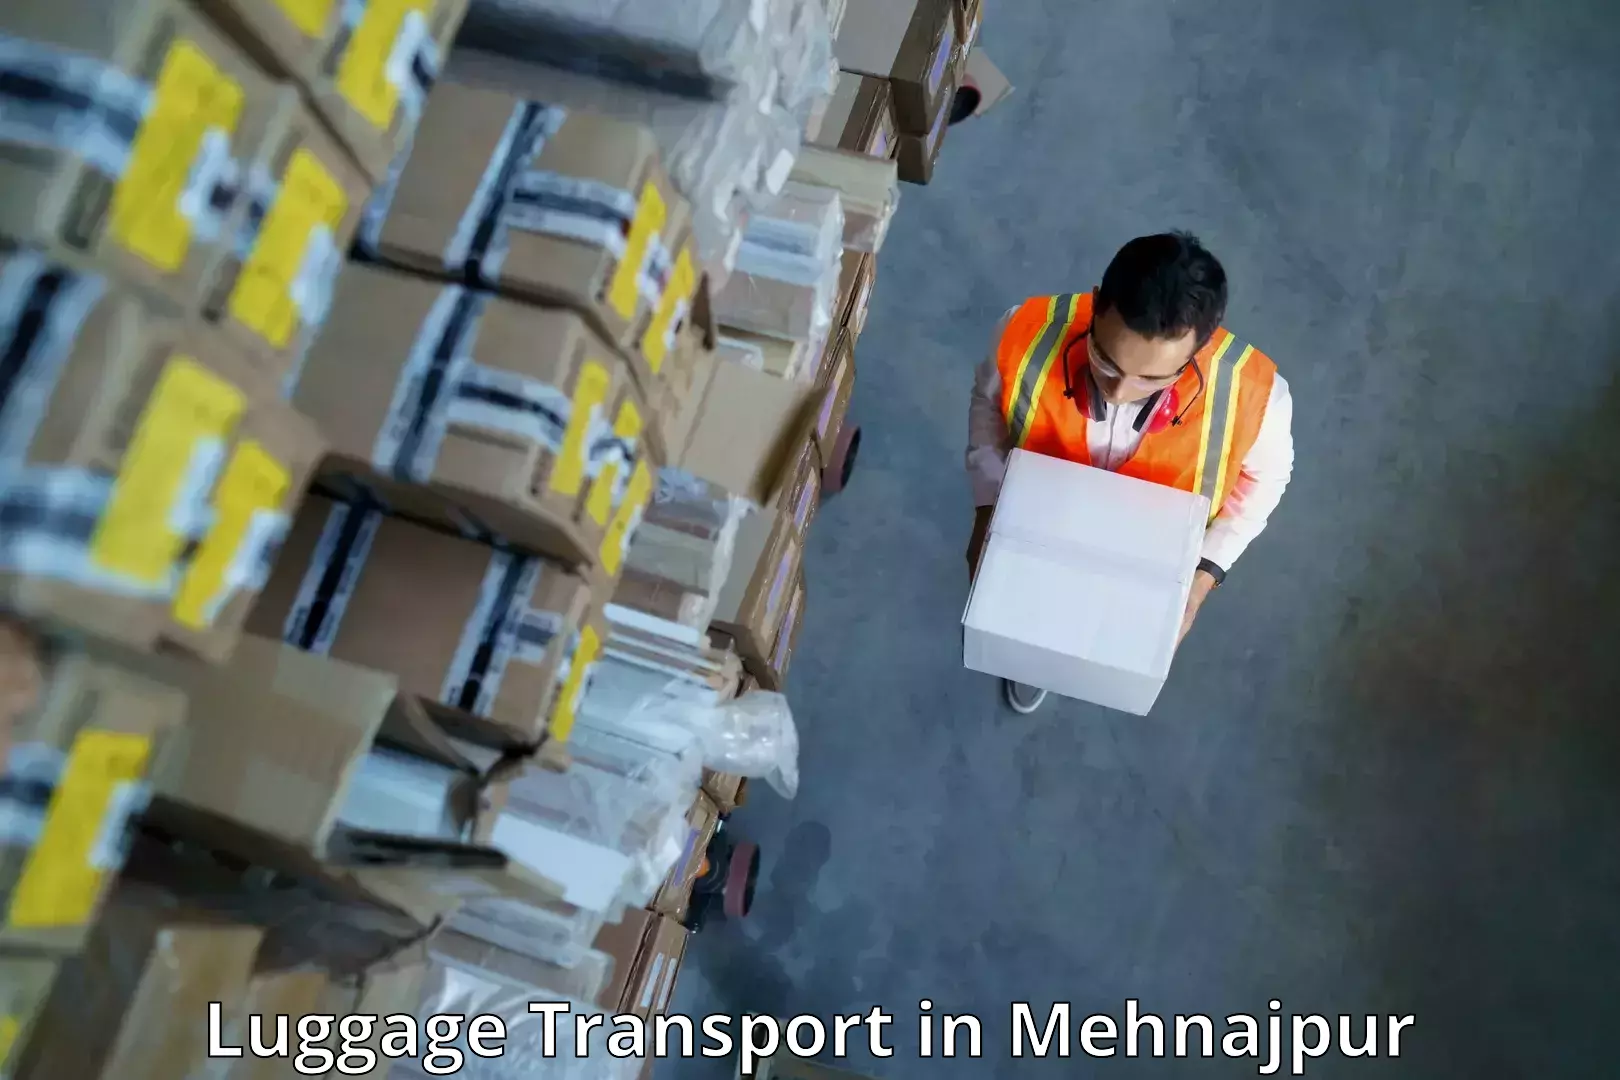 Baggage shipping advice in Mehnajpur